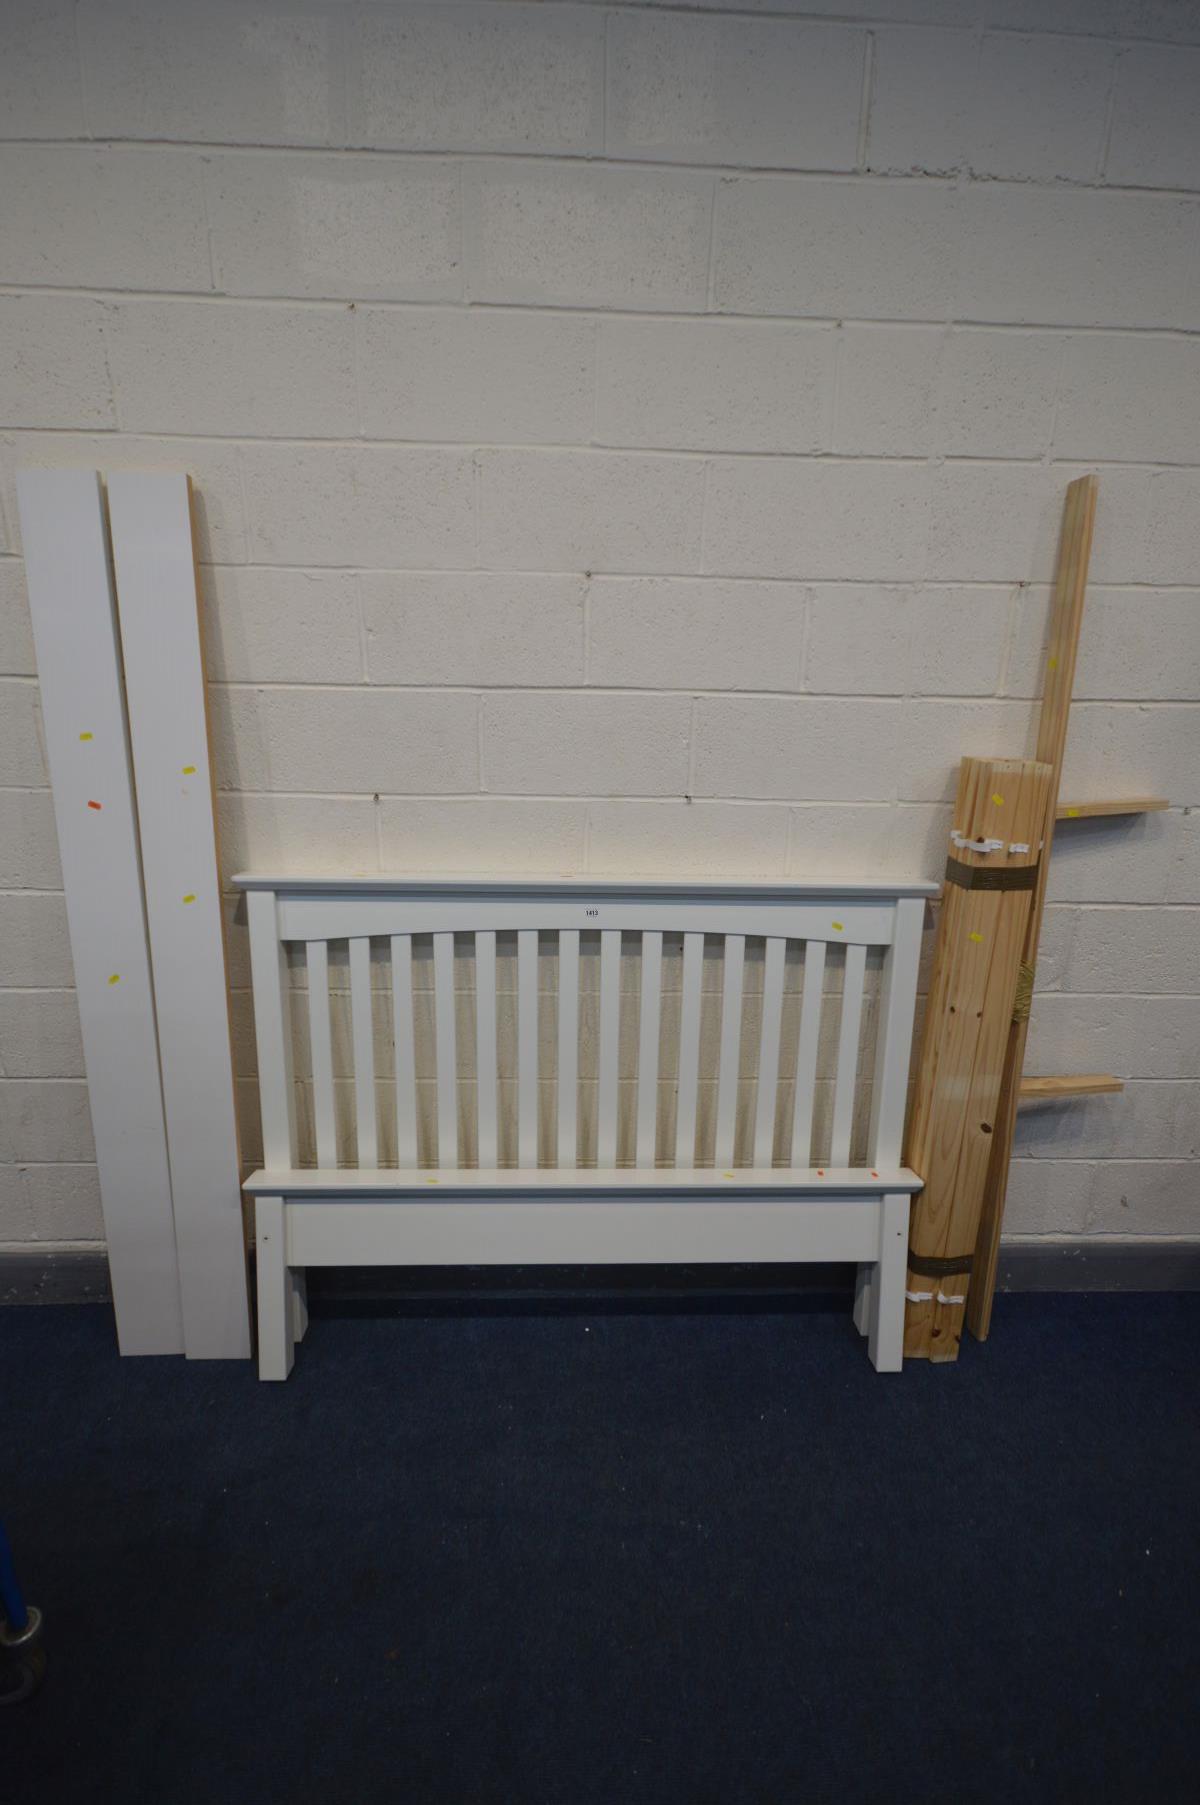 A MODERN WHITE FINISH 4FT6 BEDSTEAD, with side rails, pine slats and bolts